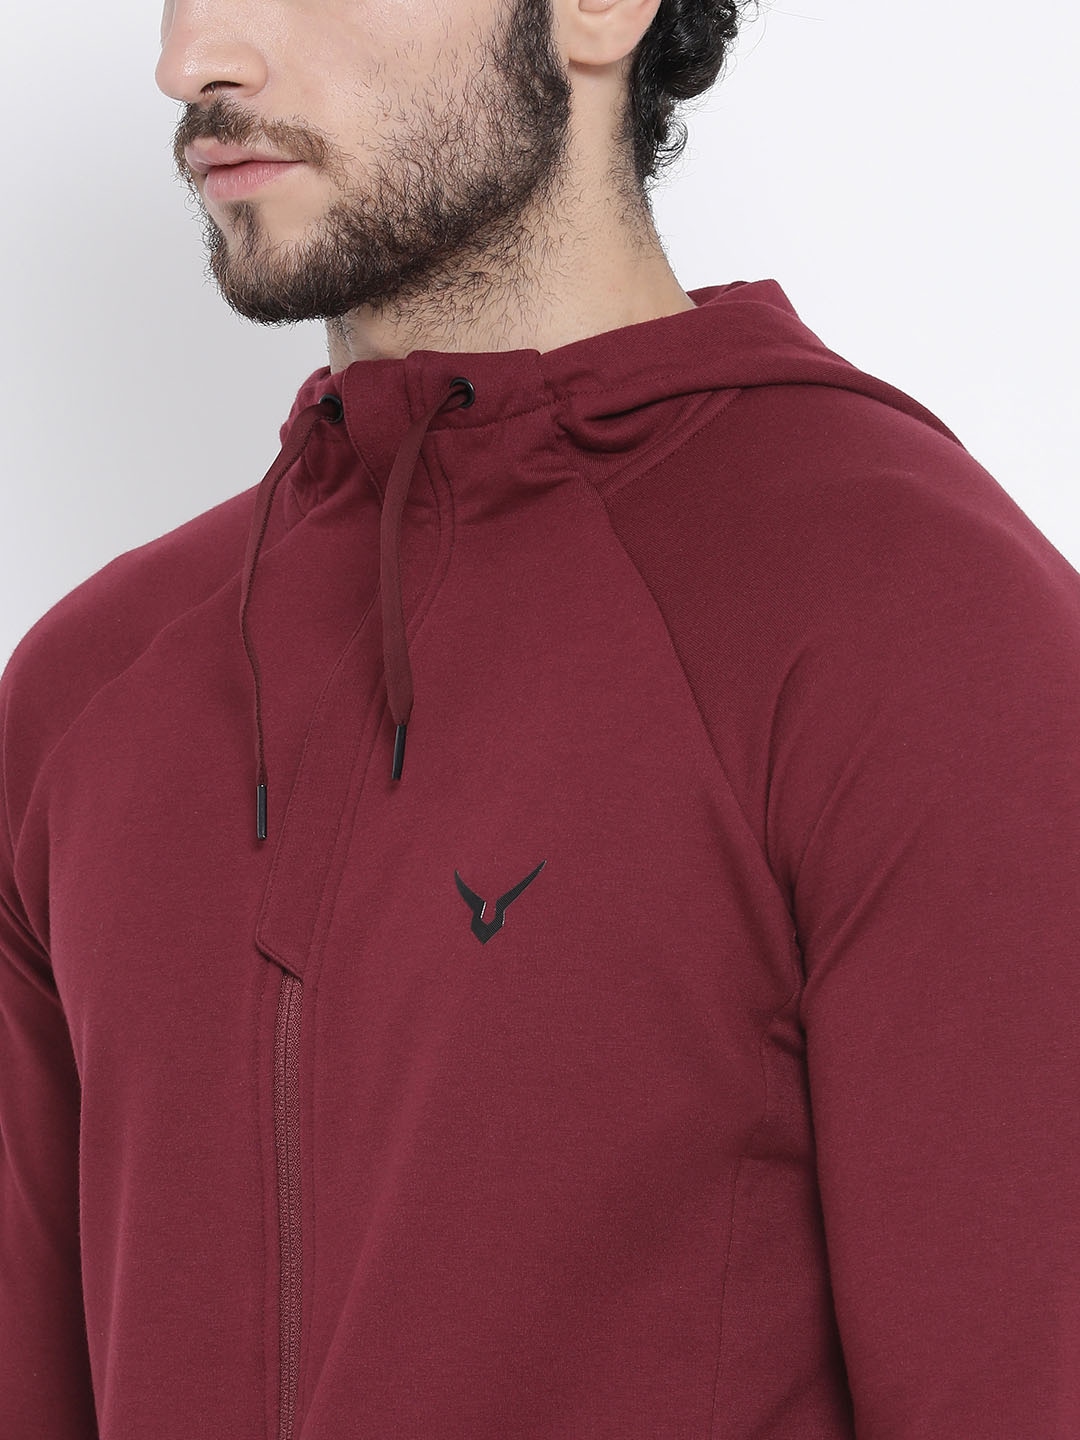 Clothing Tracksuits | Invincible Men Burgundy Solid Slim Fit Tracksuits - XW76713